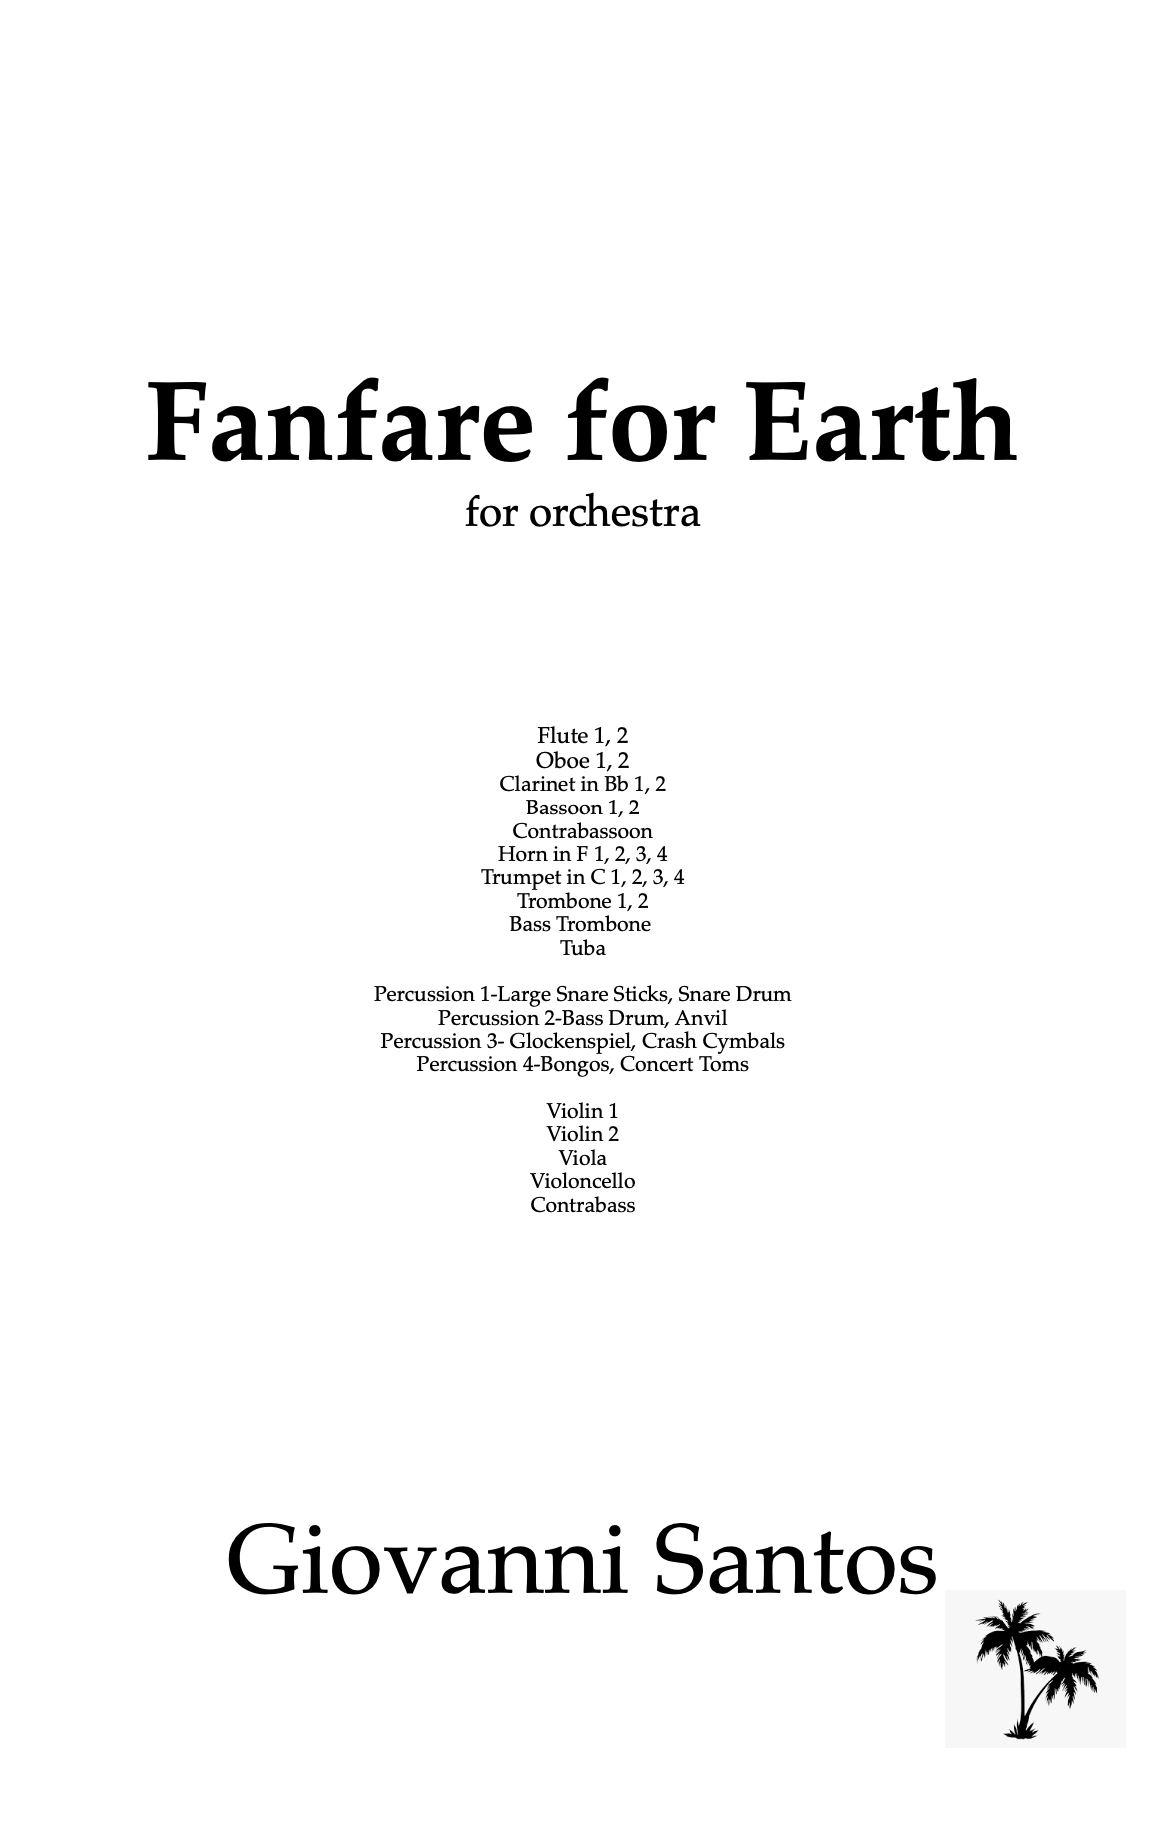 Fanfare For Earth by Giovanni Santos